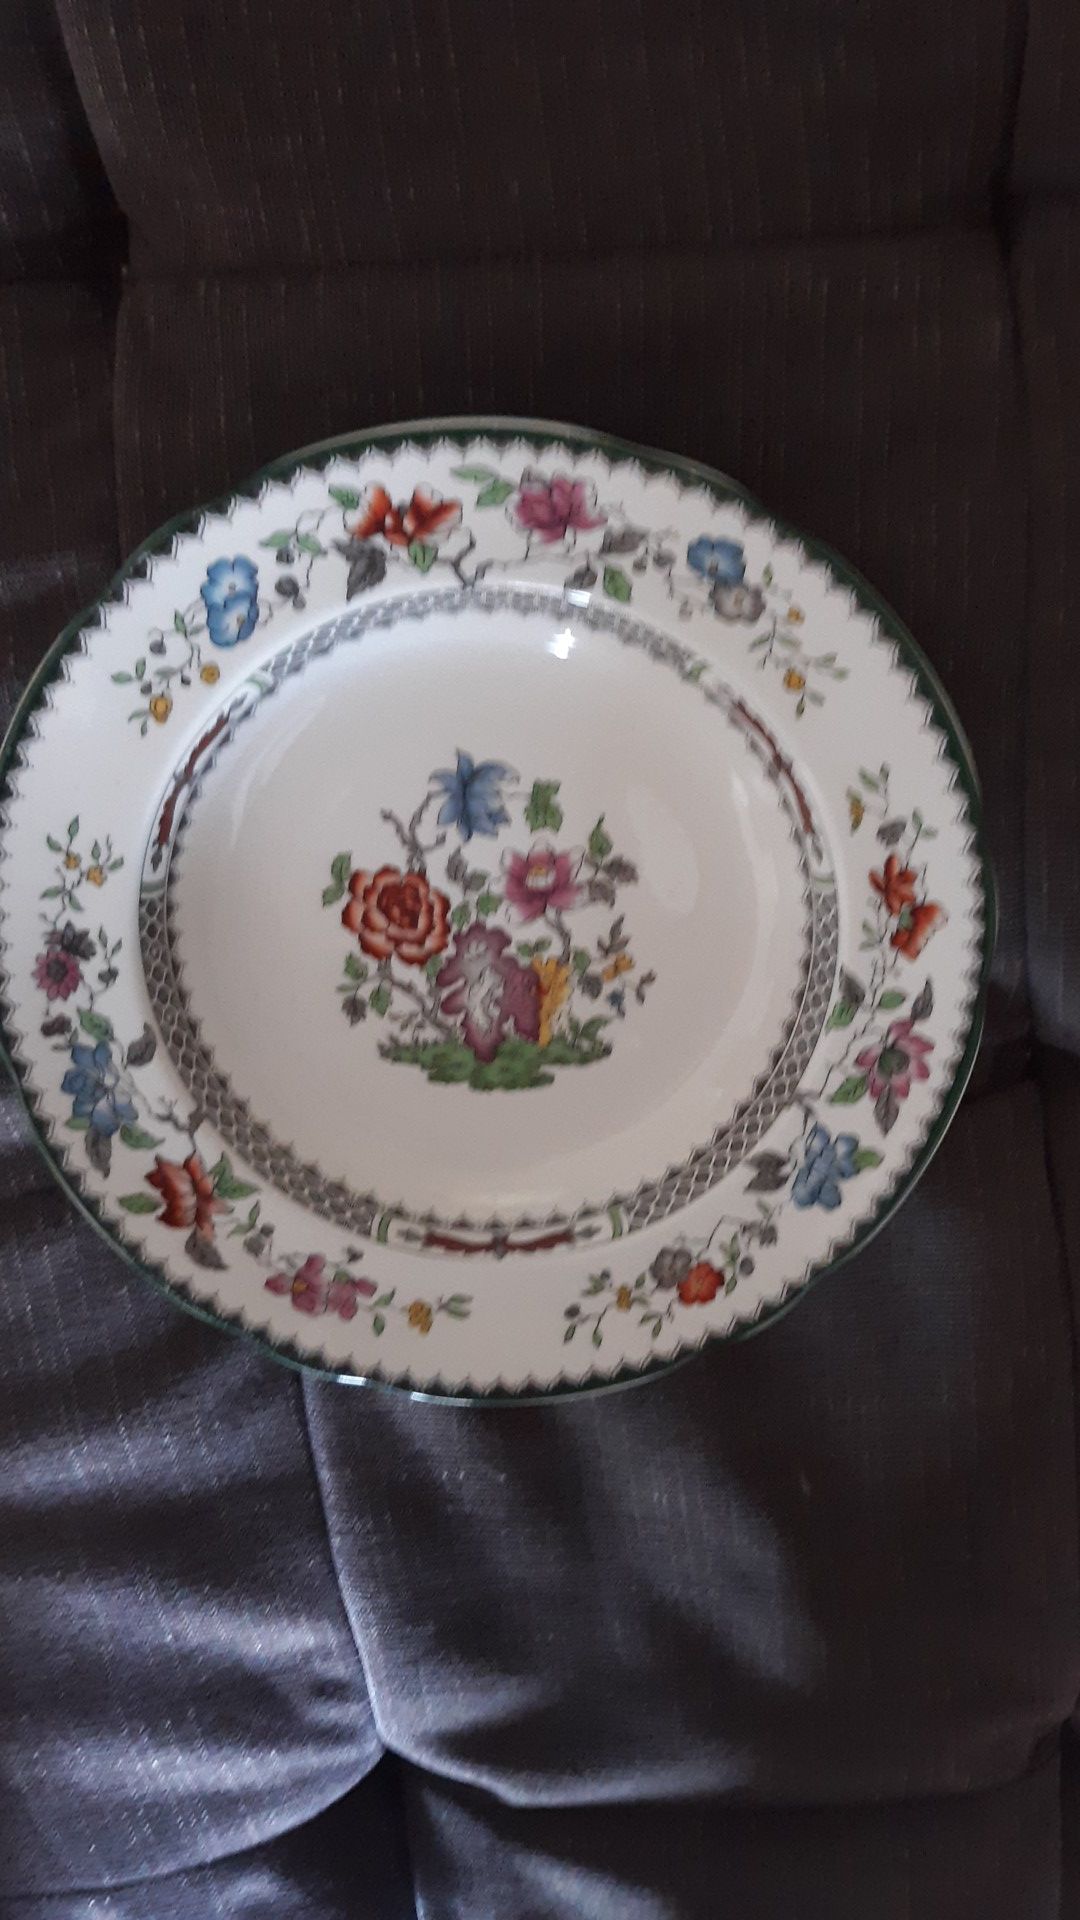 Collectible, Fine China Plates, Spode Design, Chinese Rose Pattern